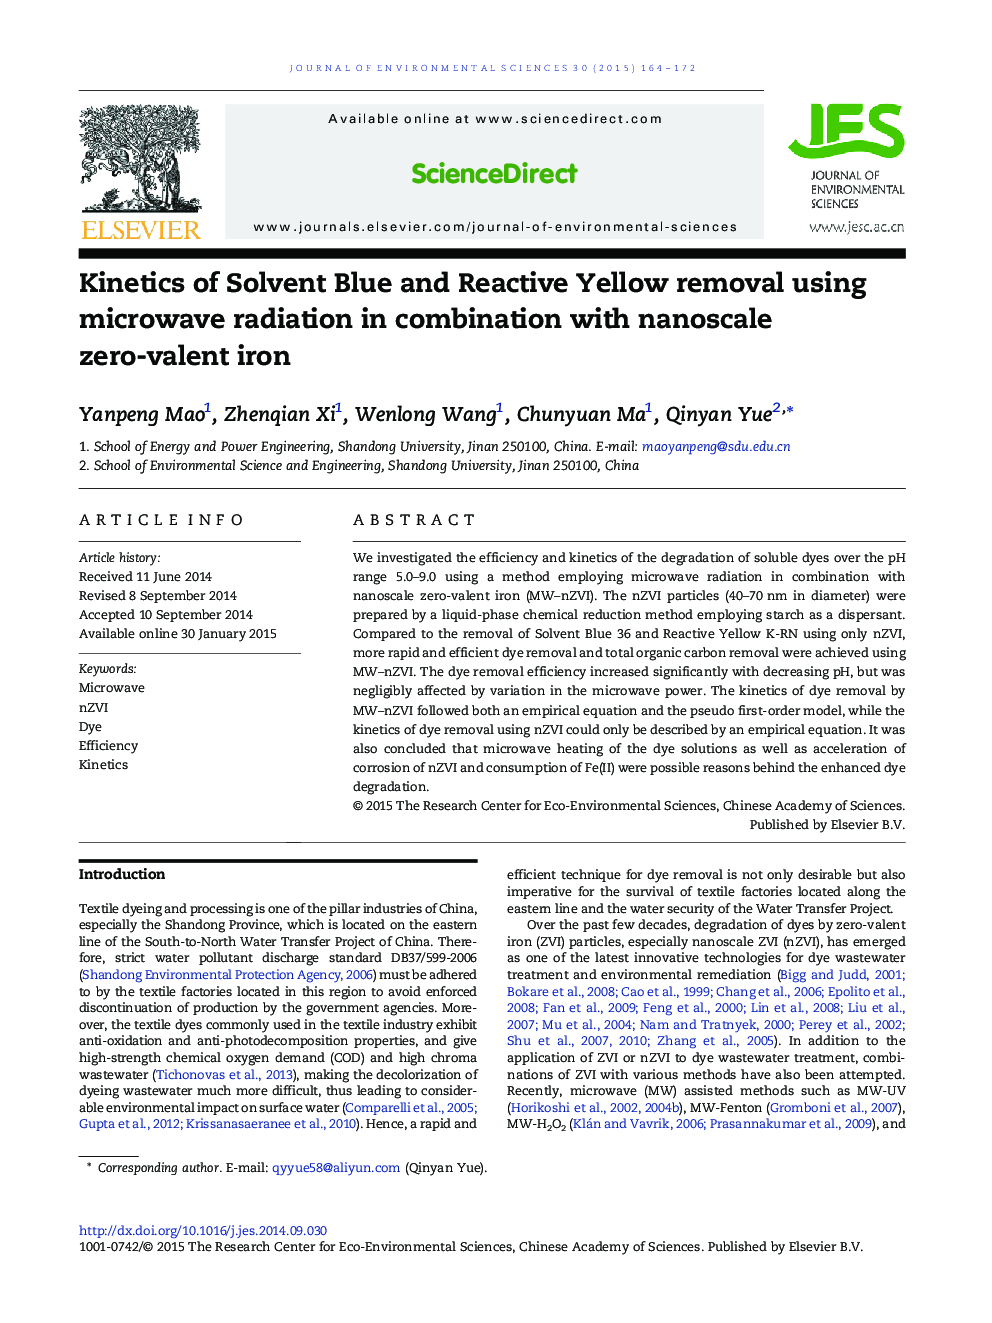 Kinetics of Solvent Blue and Reactive Yellow removal using microwave radiation in combination with nanoscale zero-valent iron